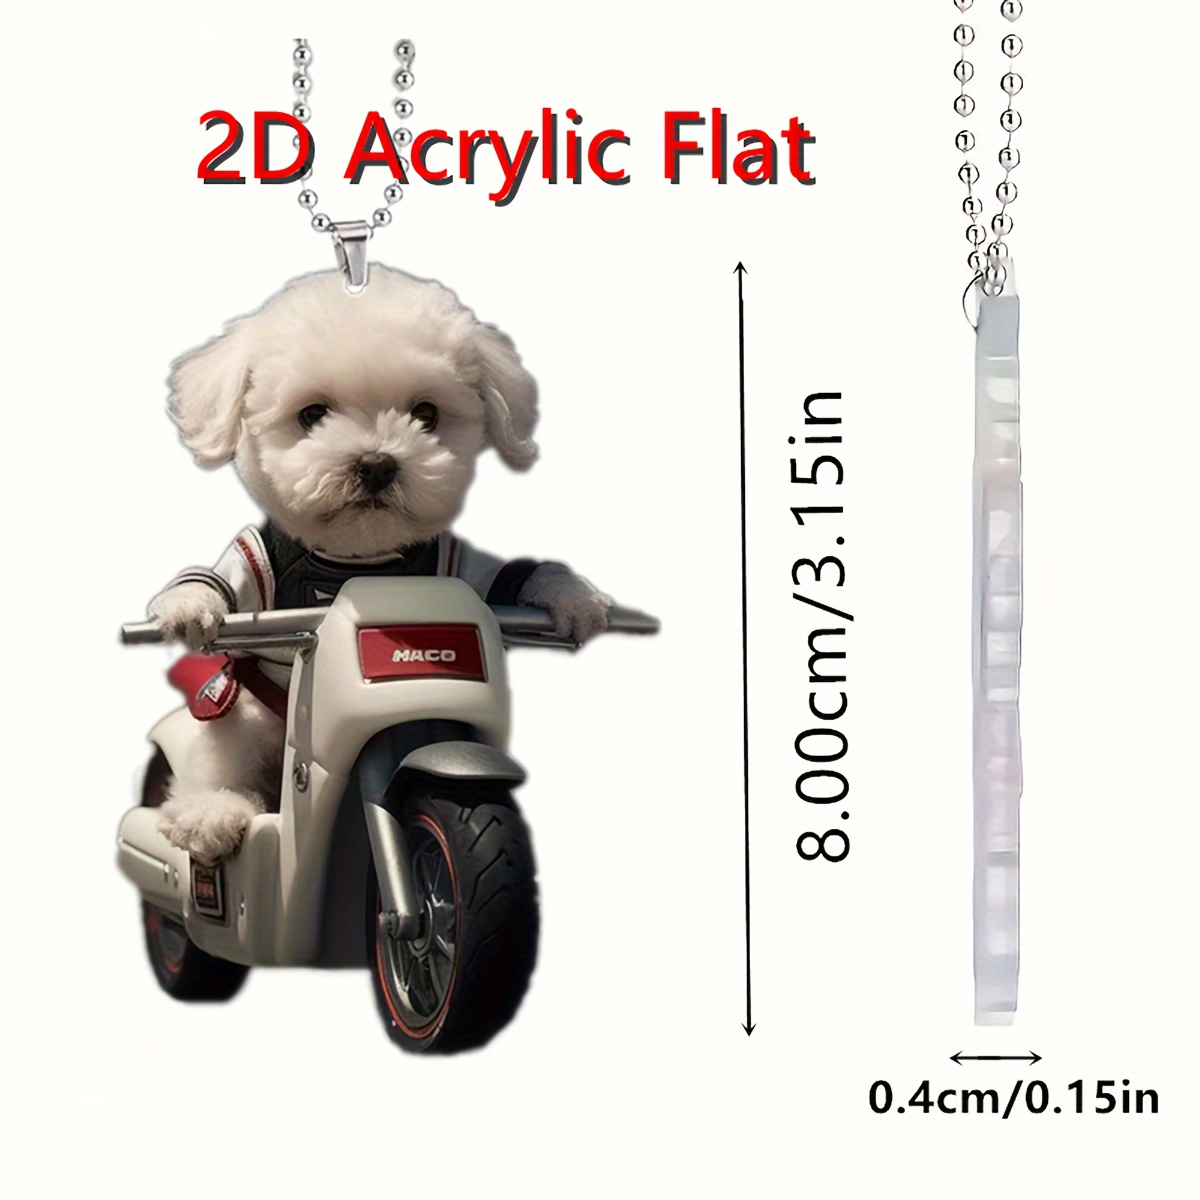 Flat Flying Pet Dog Hanging Ornament Keychain Colorful Balloon Car Interior  Accessory Car Pendant Cute Gift Home Room Decor